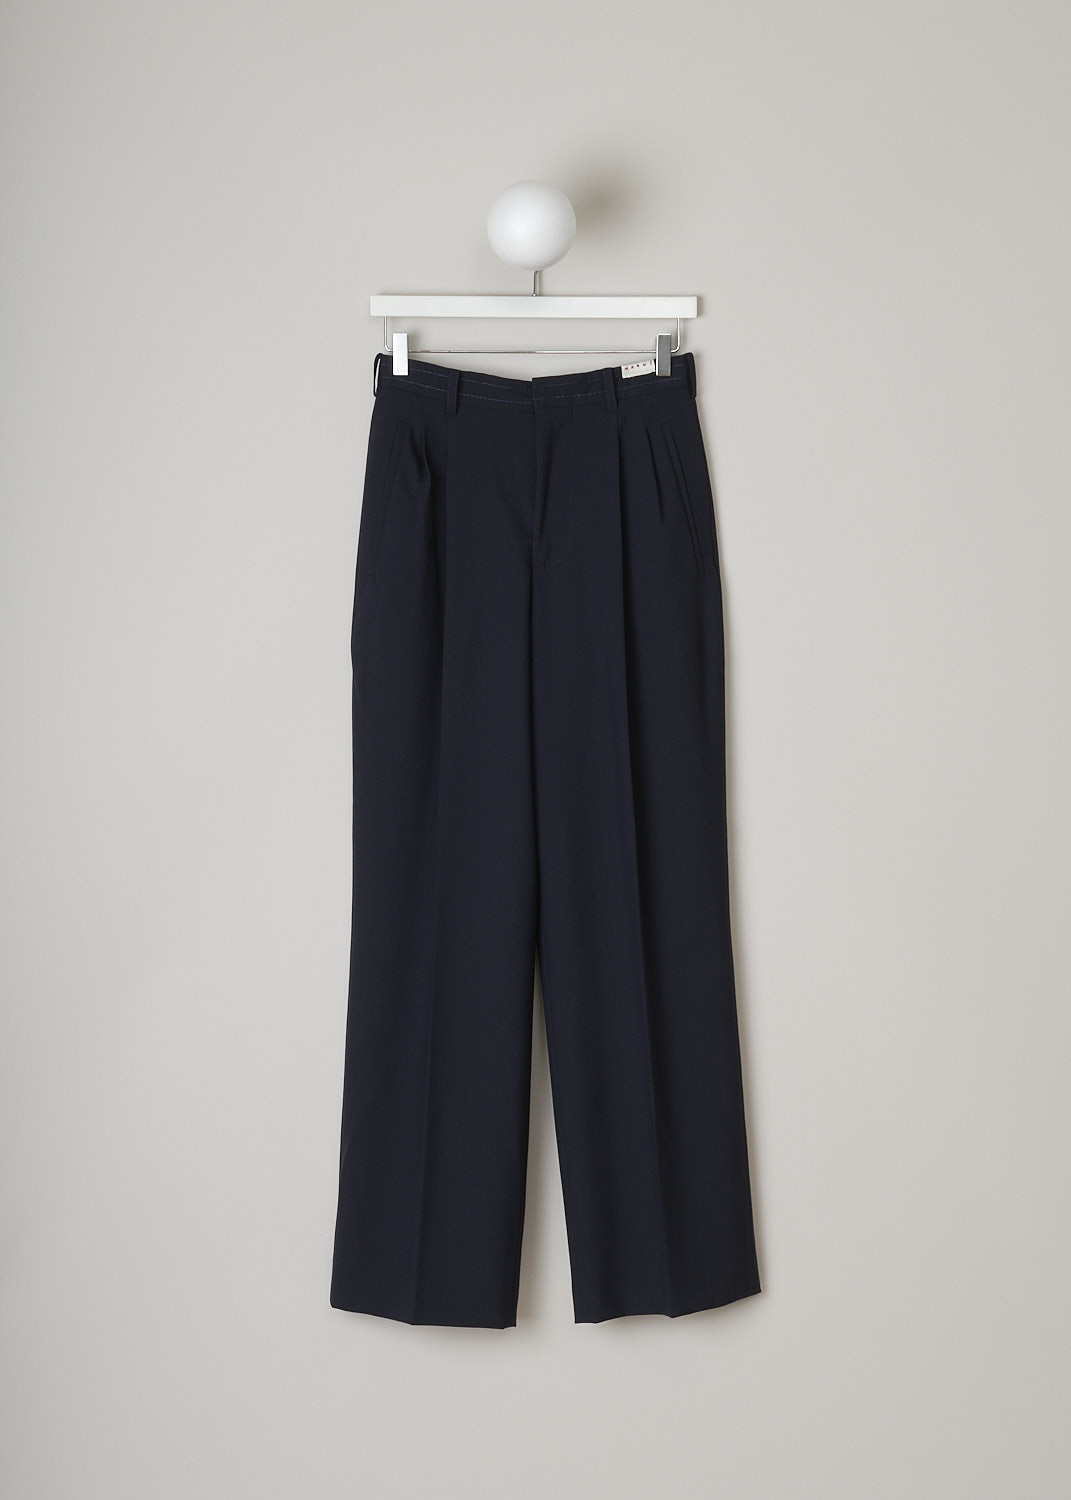 MARNI, DARK NAVY HIGH-WAISTED PANTS, PAMA0385U2_TW839_00B99, Blue, Front, These dark navy high-waisted pants have a waistband with belt loops. In the front, the brand's logo patch is attached on the waistband.
The pants has slanted welt pockets. Centre pleats run along the length of the wide pants legs. In the back, these pants have two welt pockets: one with flap and button. 
  
